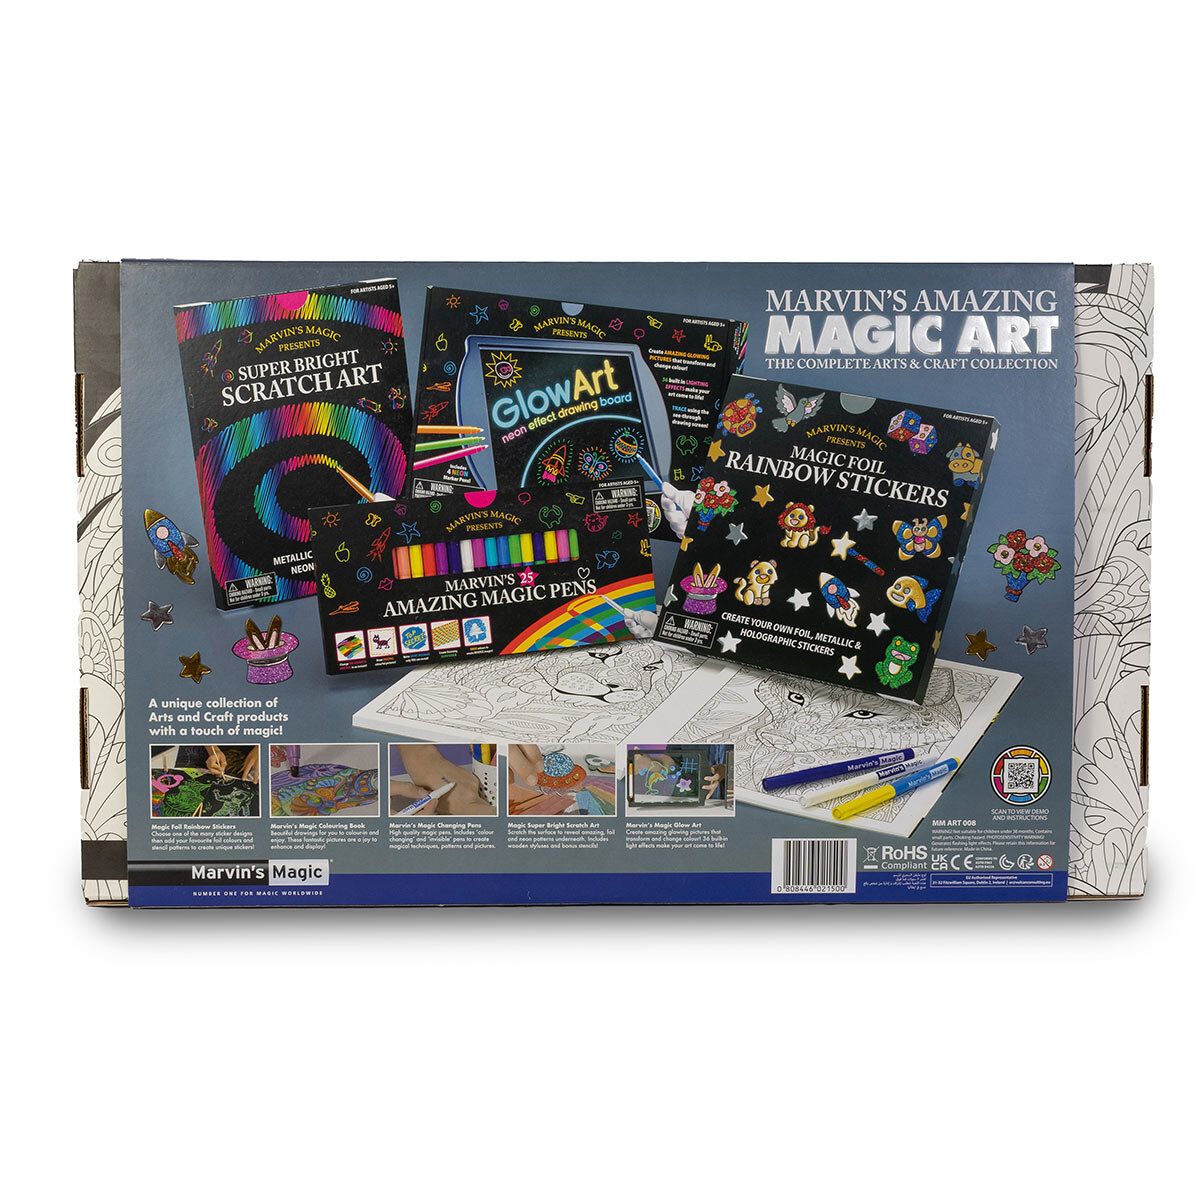 Buy Marvins Magic Art Collection Back of Box Image at Costco.co.uk